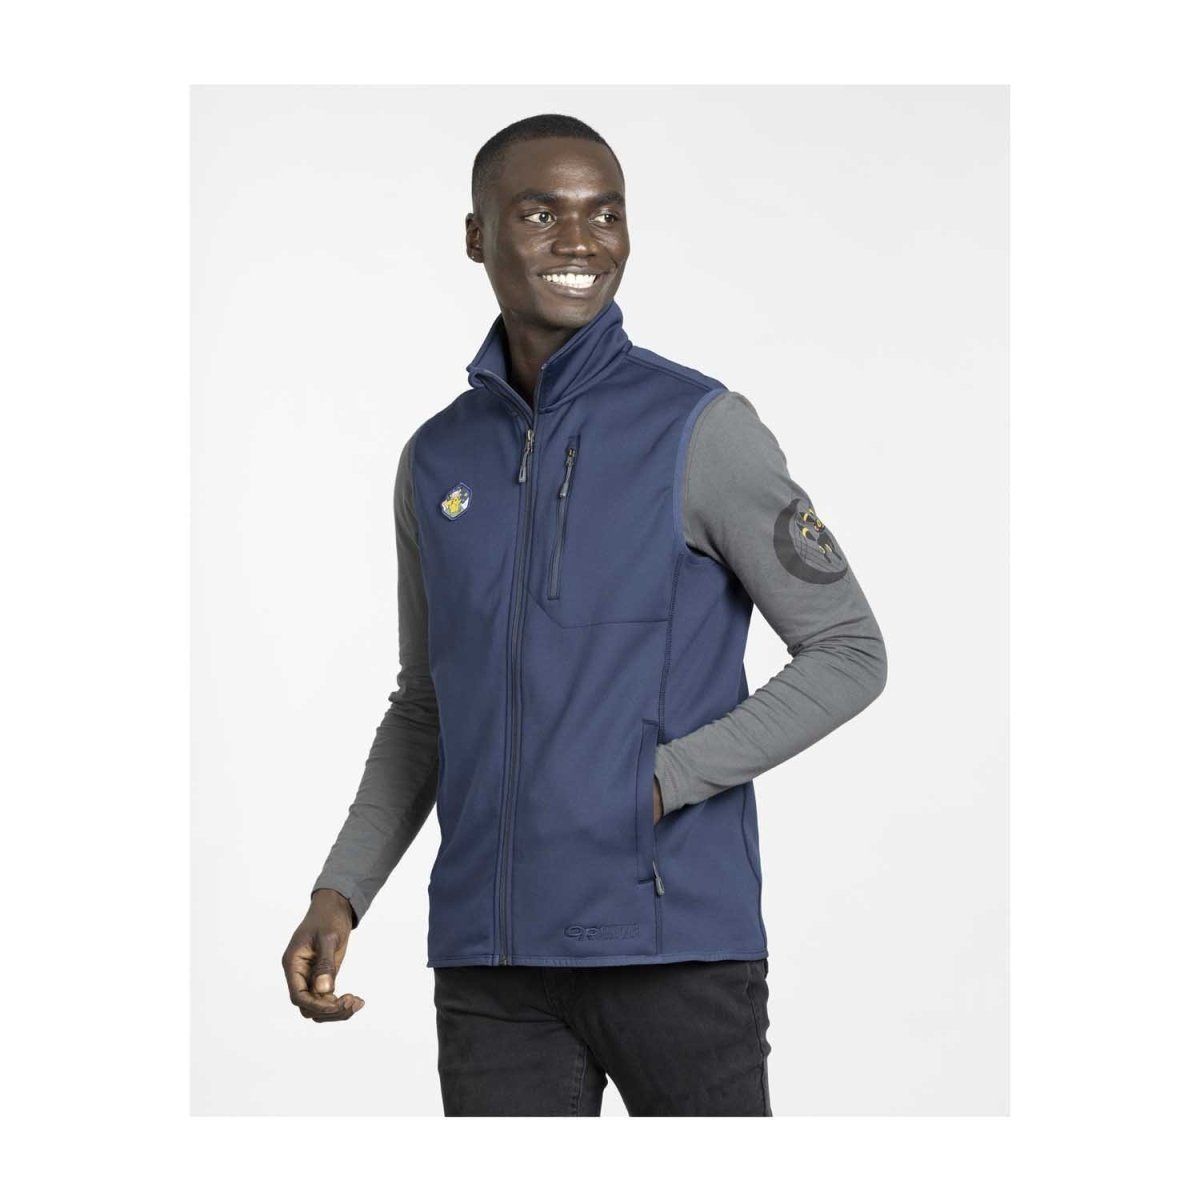 kathedraal Geplooid fout Outdoors with Pokémon Middle Fork Dark Blue Fleece Zip-Up Vest by Outdoor  Research - Men | Pokémon Center Official Site